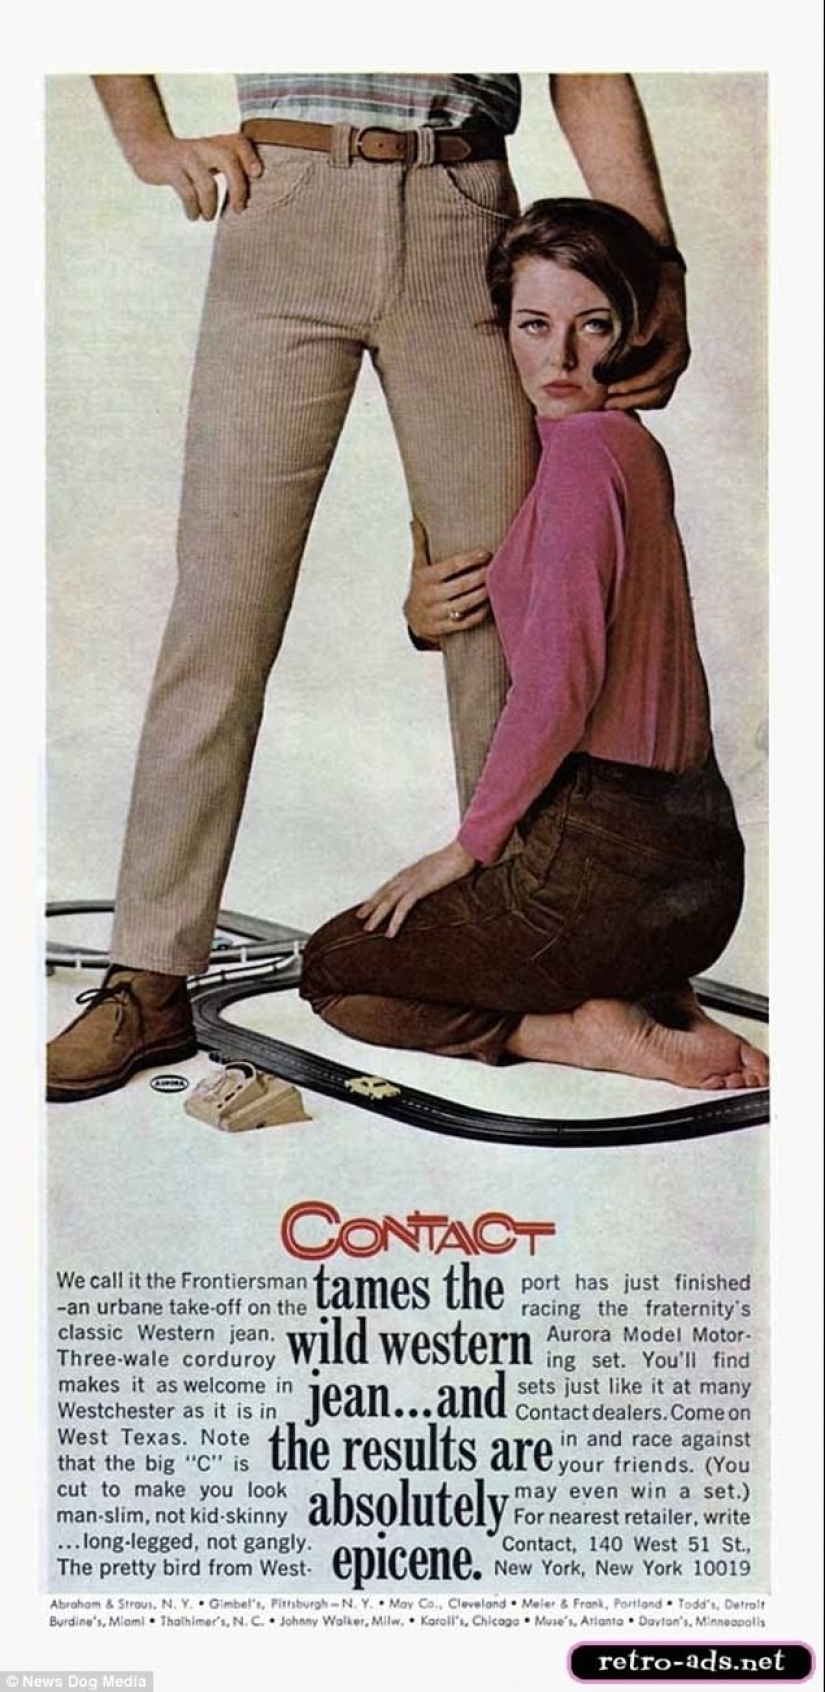 Woman, know your place: sexist advertising posters of the mid-20th century